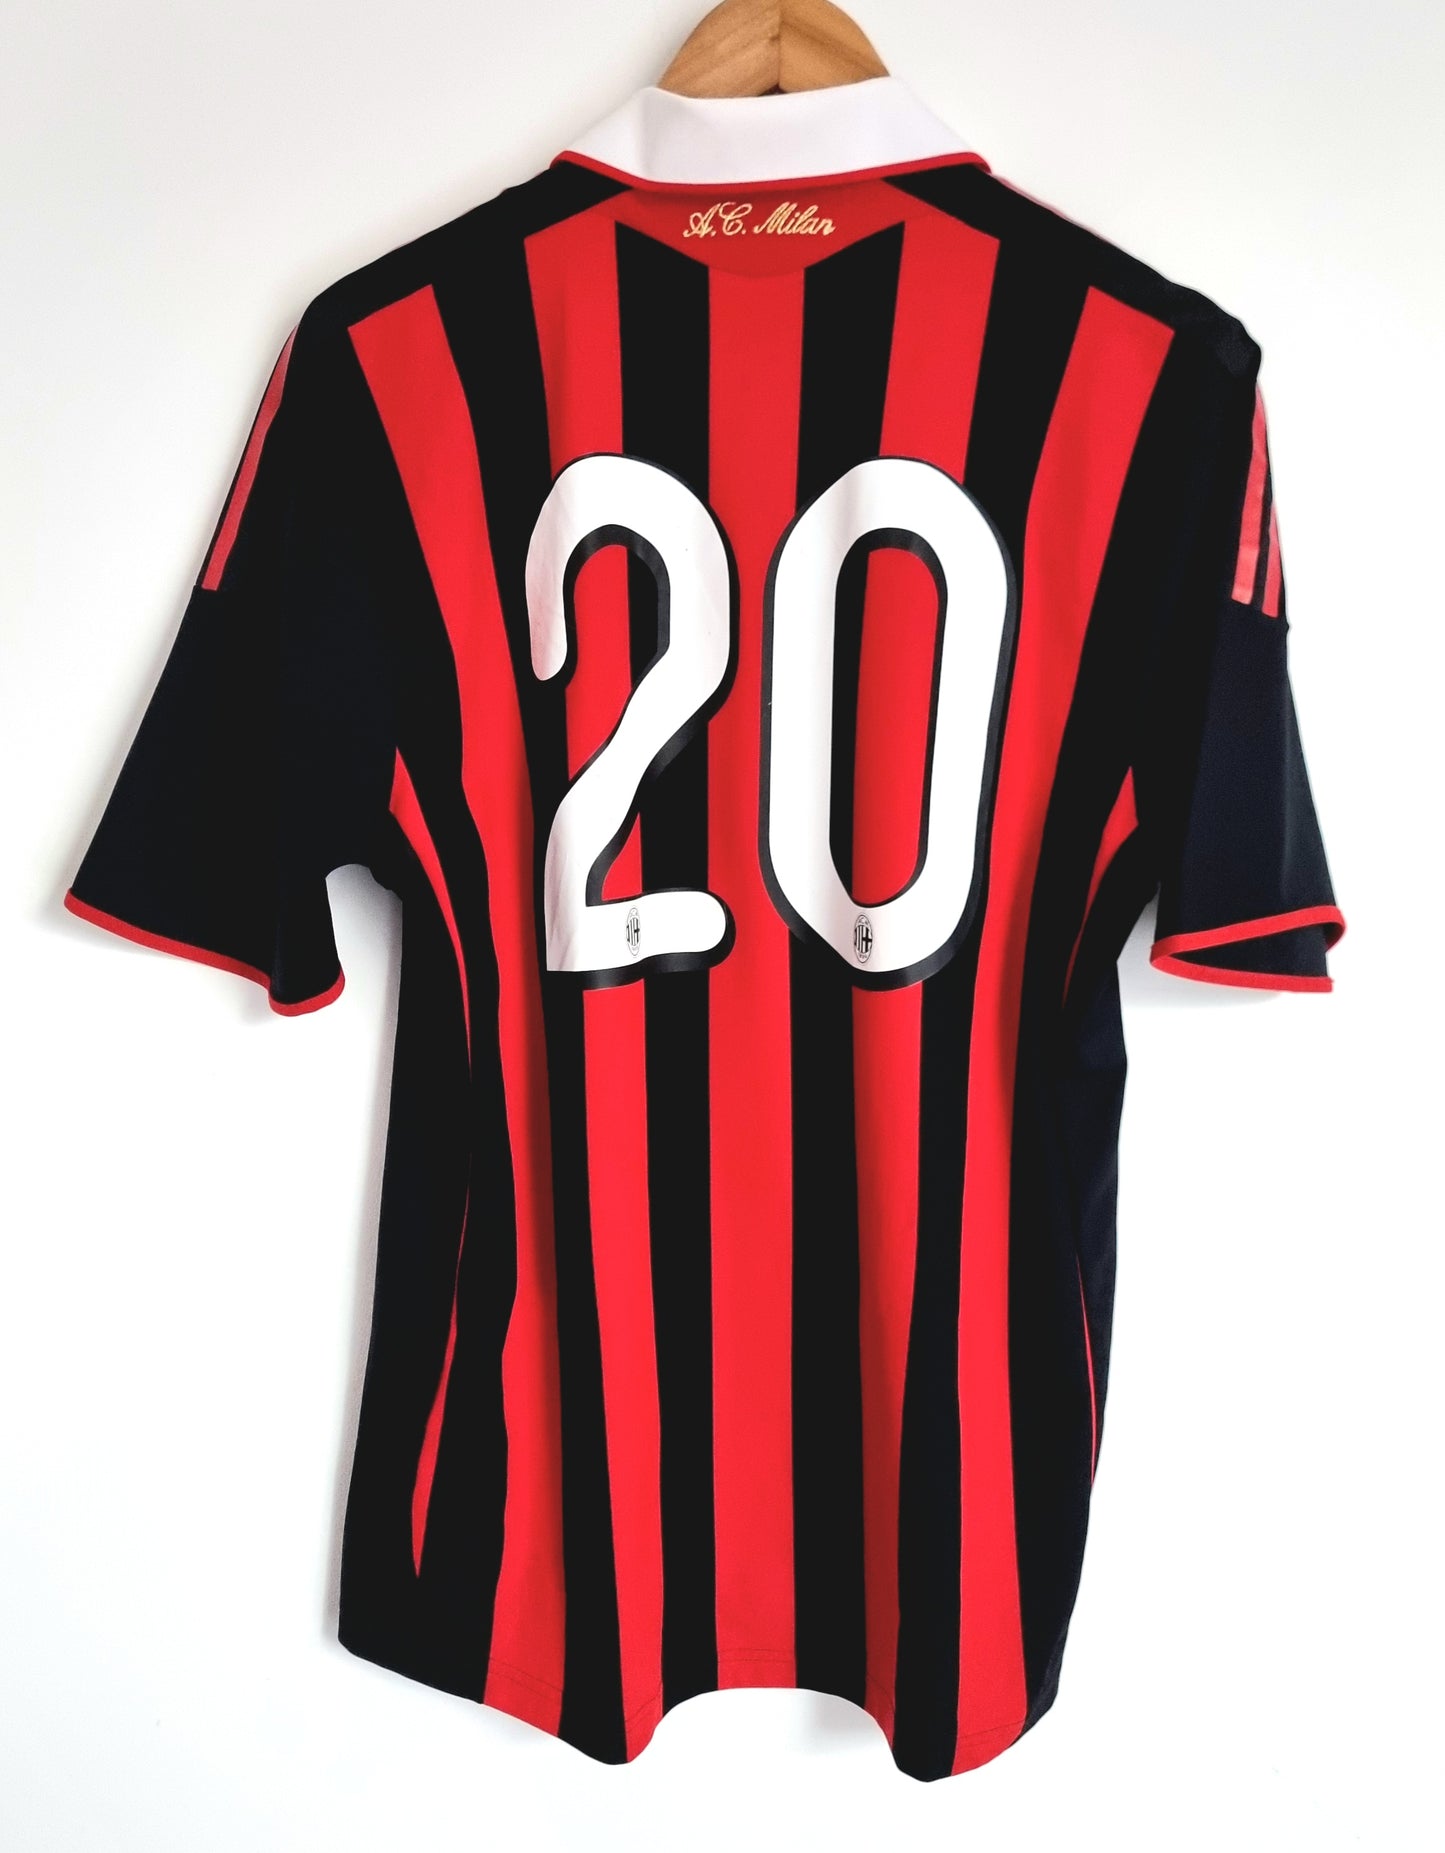 Adidas Formotion AC Milan 09/10 '20 (Abate)' Player Issue Home Shirt Large